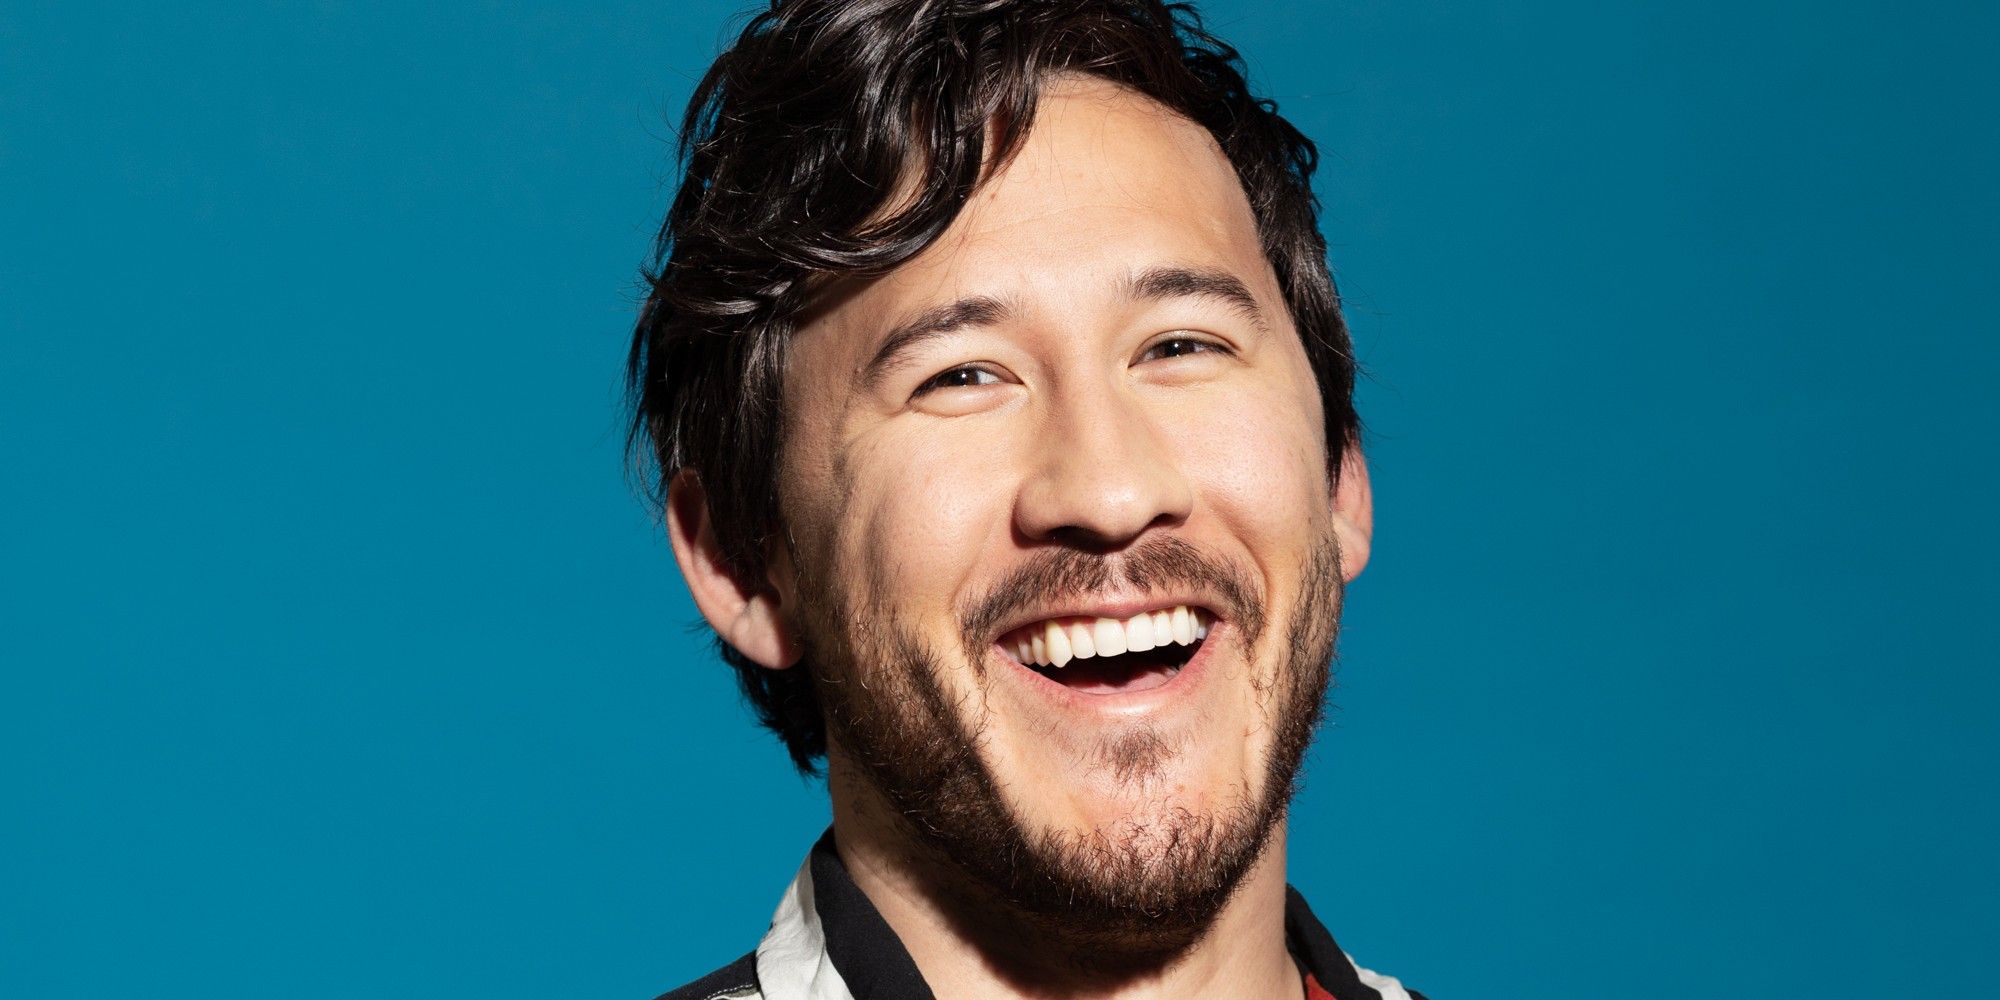 Youtuber Markiplier To Write Direct And Star In Iron Lung Film Adaptation